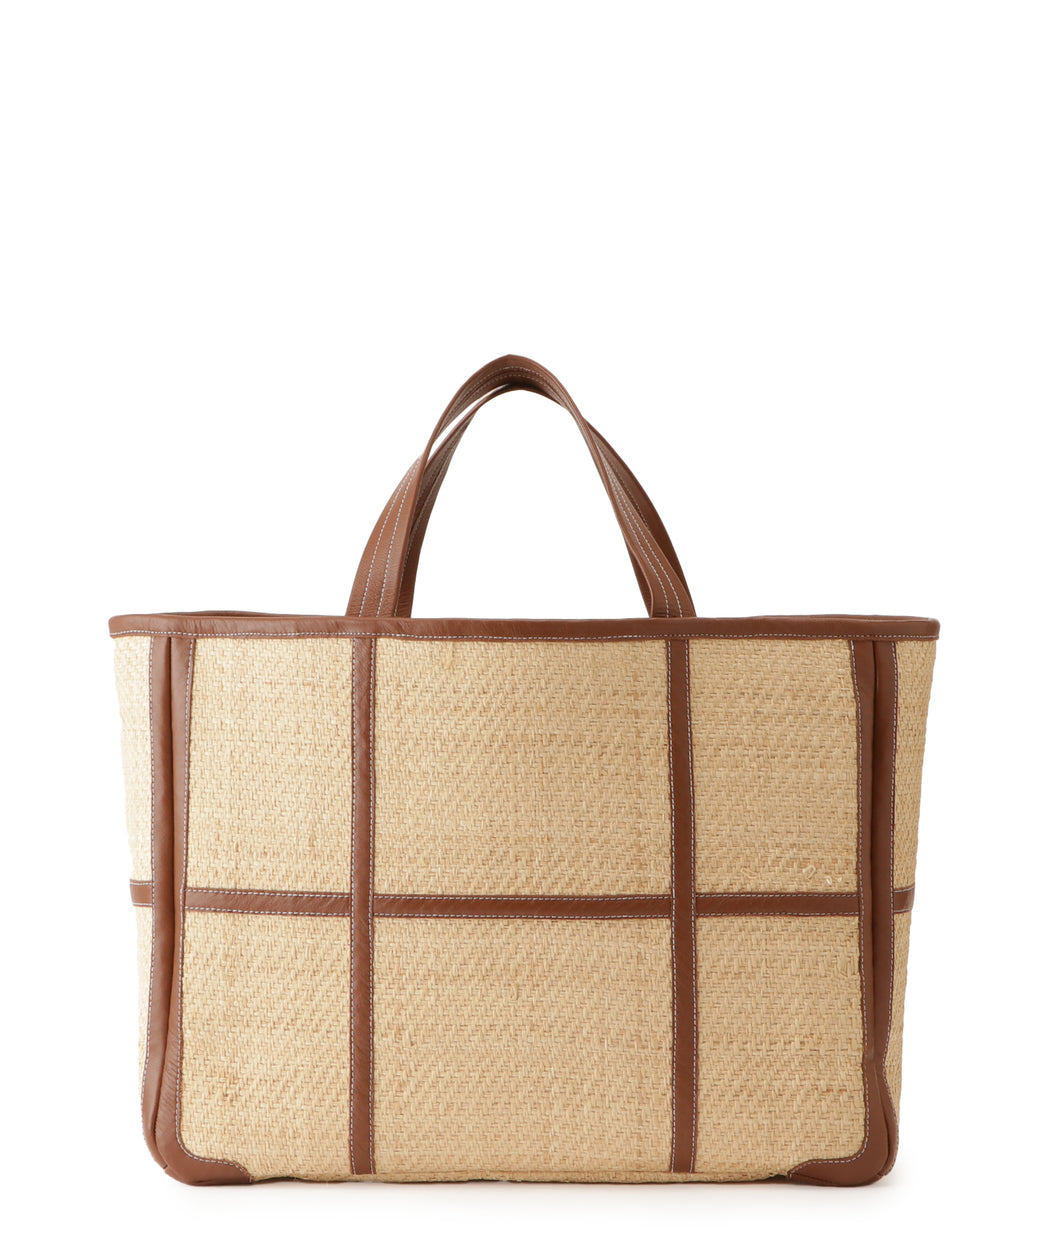 Wide leather-trimmed tote bag